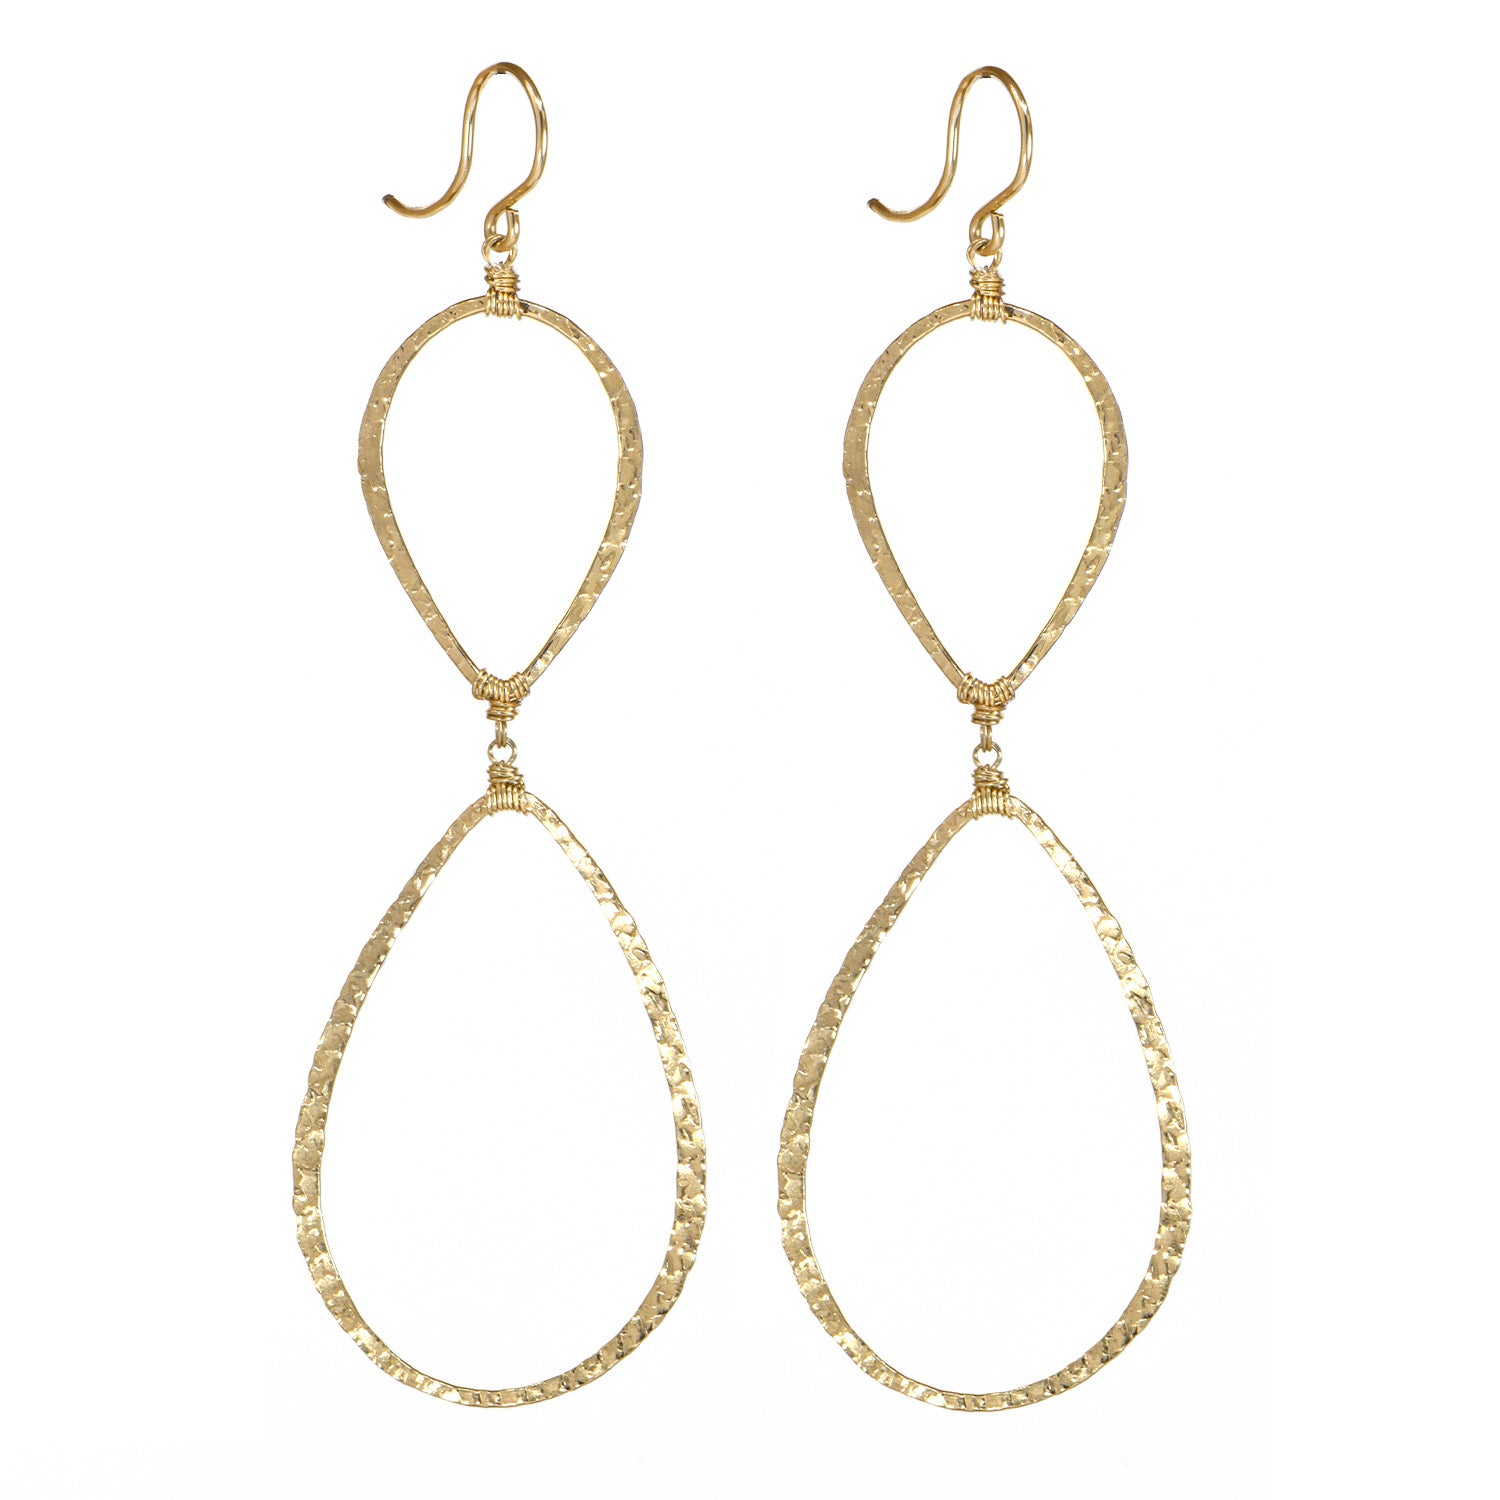 Accessorize London Hammered Disc Short Drop Earrings|One Size, GOLD  (MN-98115181001) : Amazon.in: Fashion